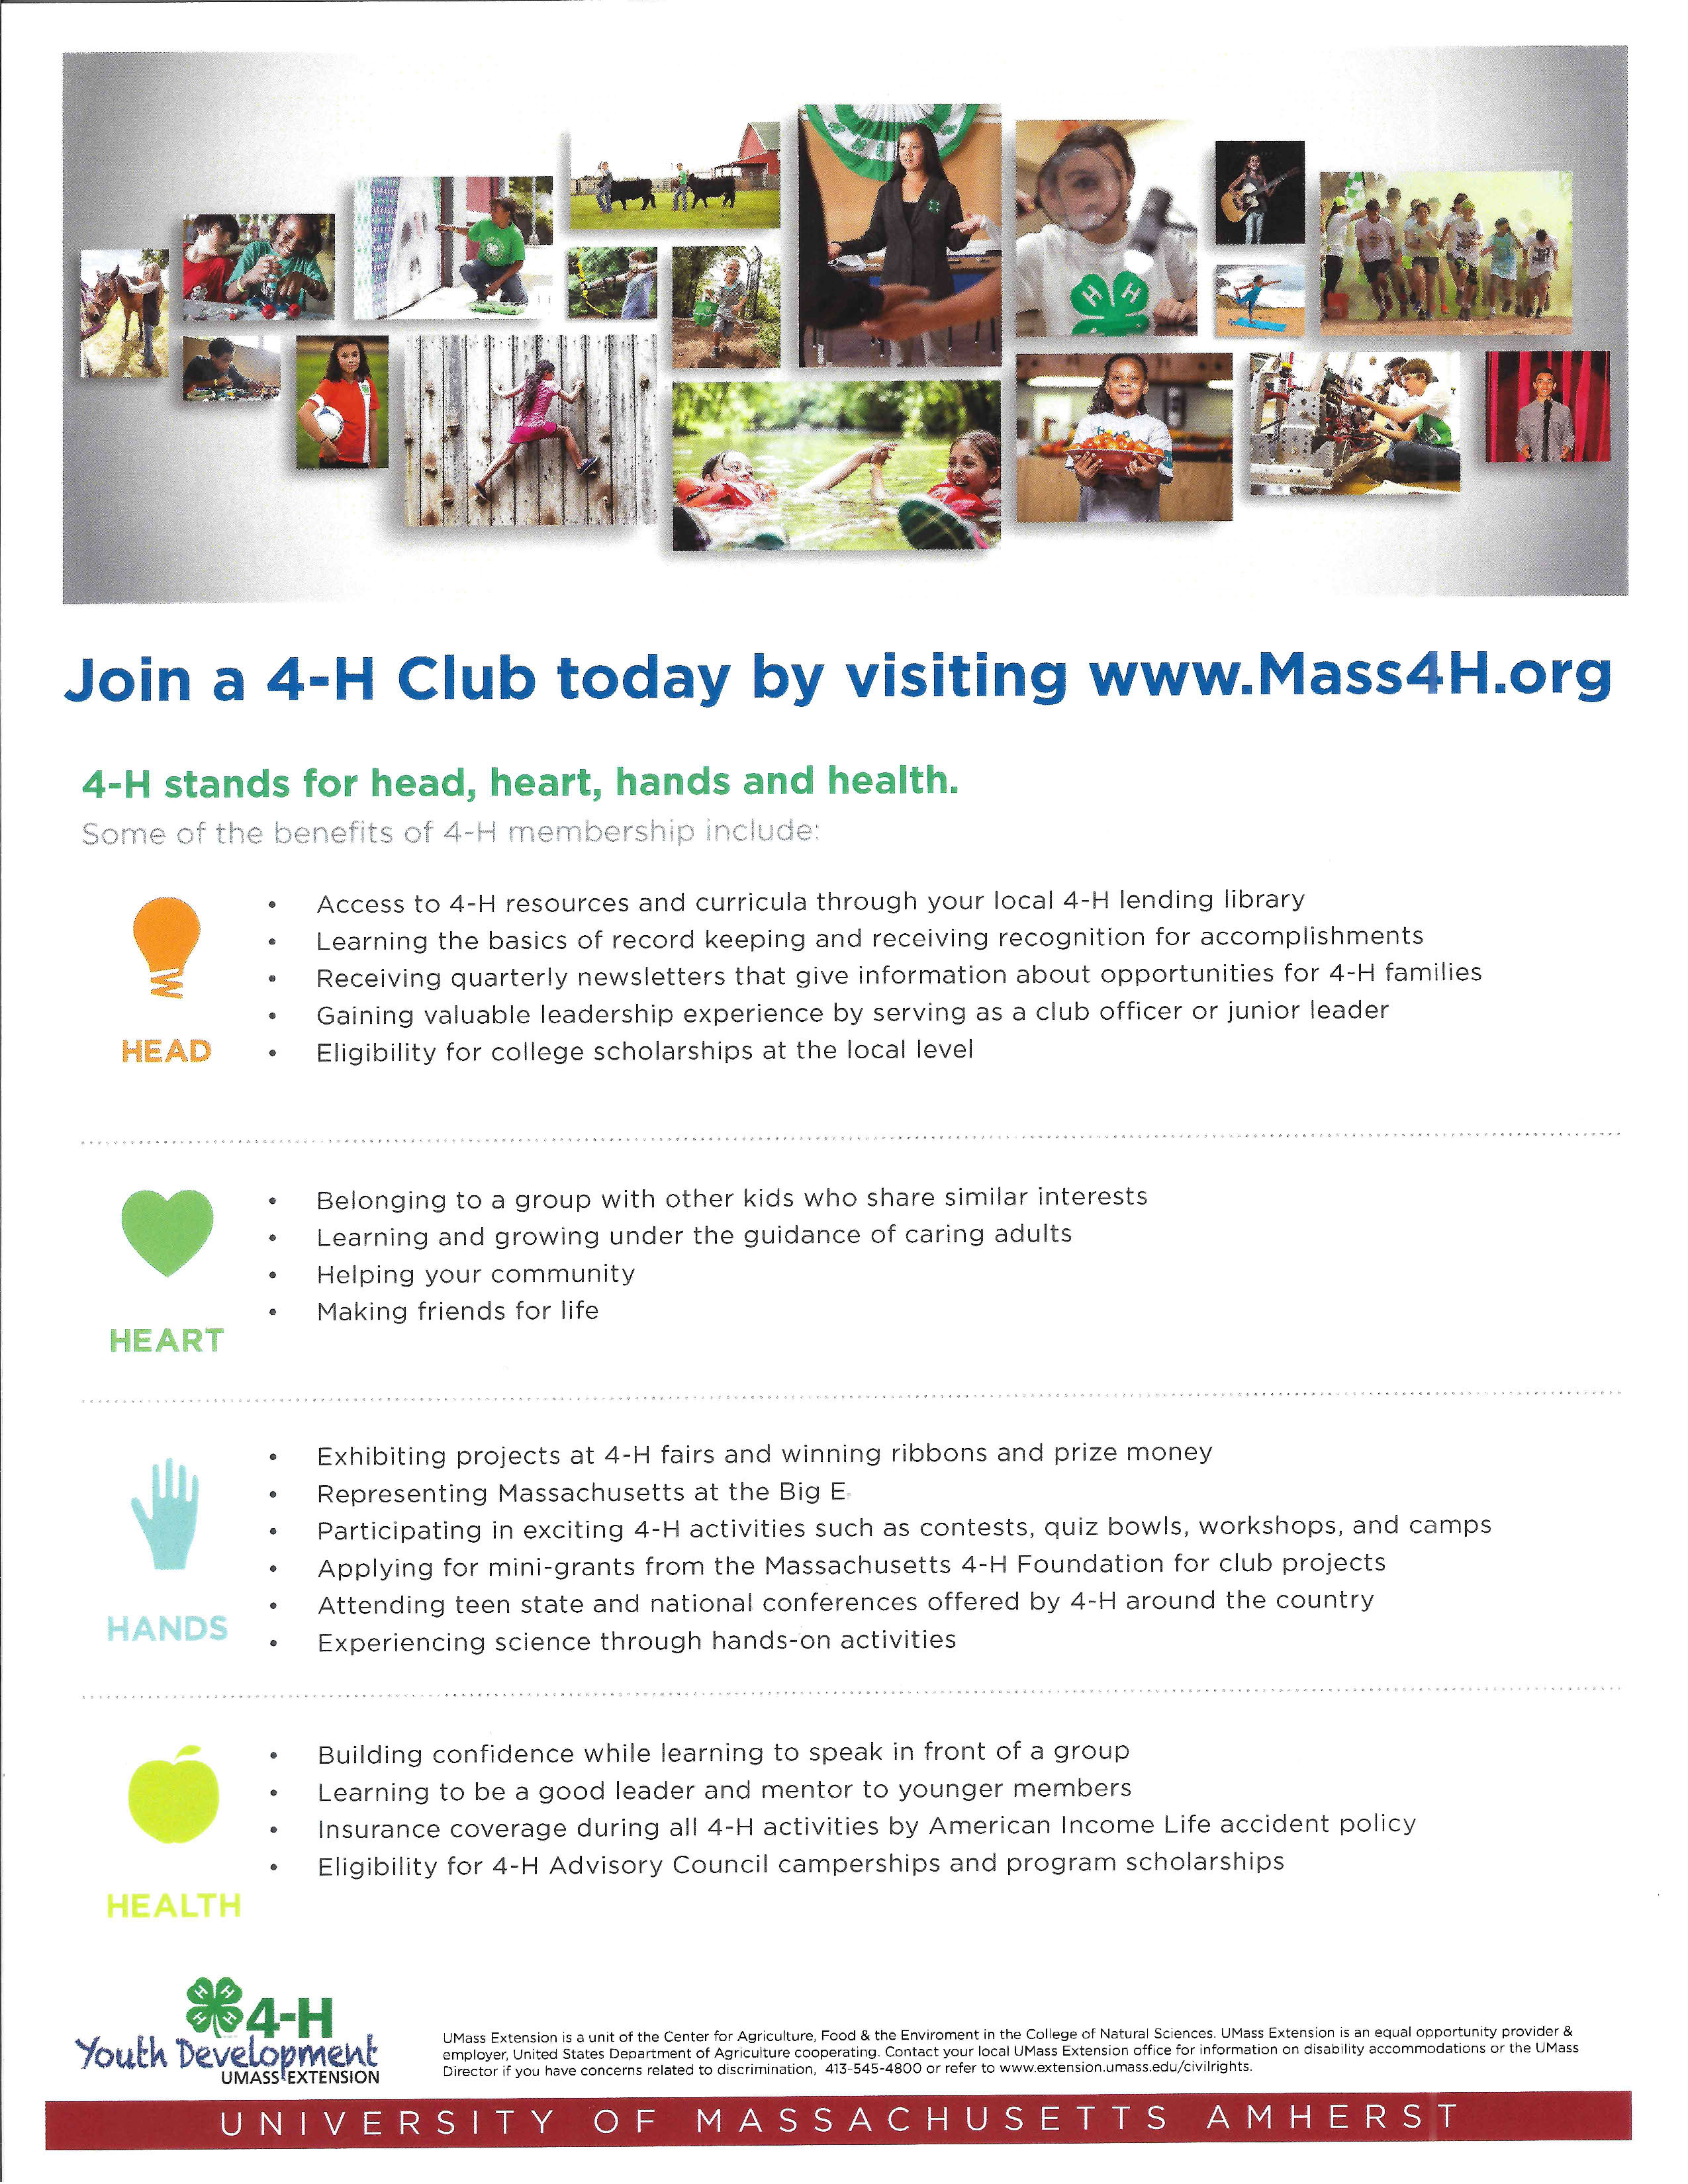 Benefits of joining Mass 4-H 